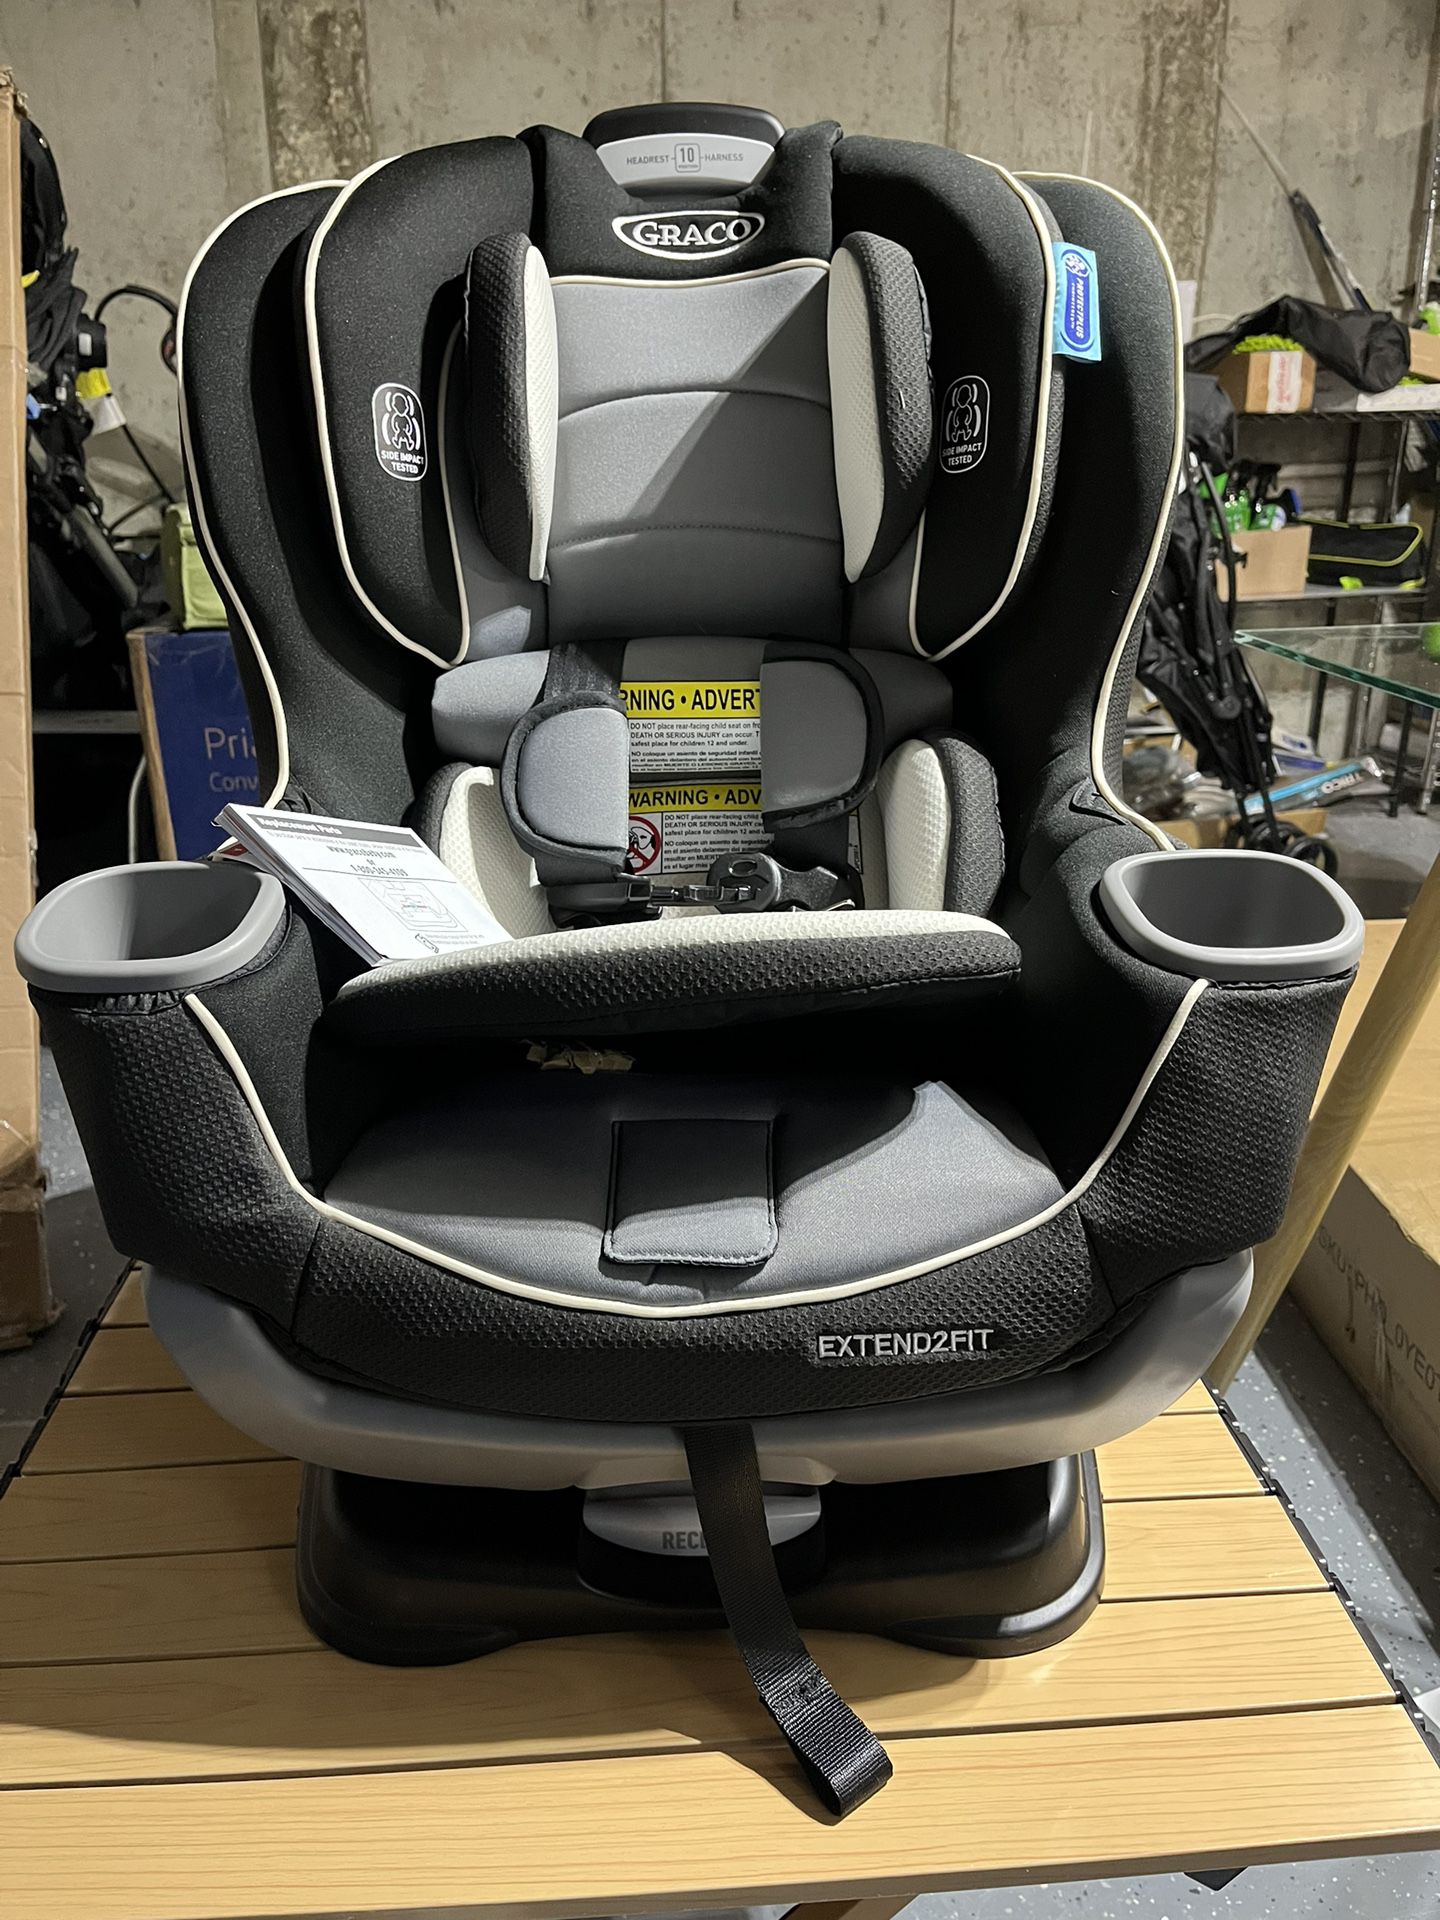 Graco Extend2fit Car Seat